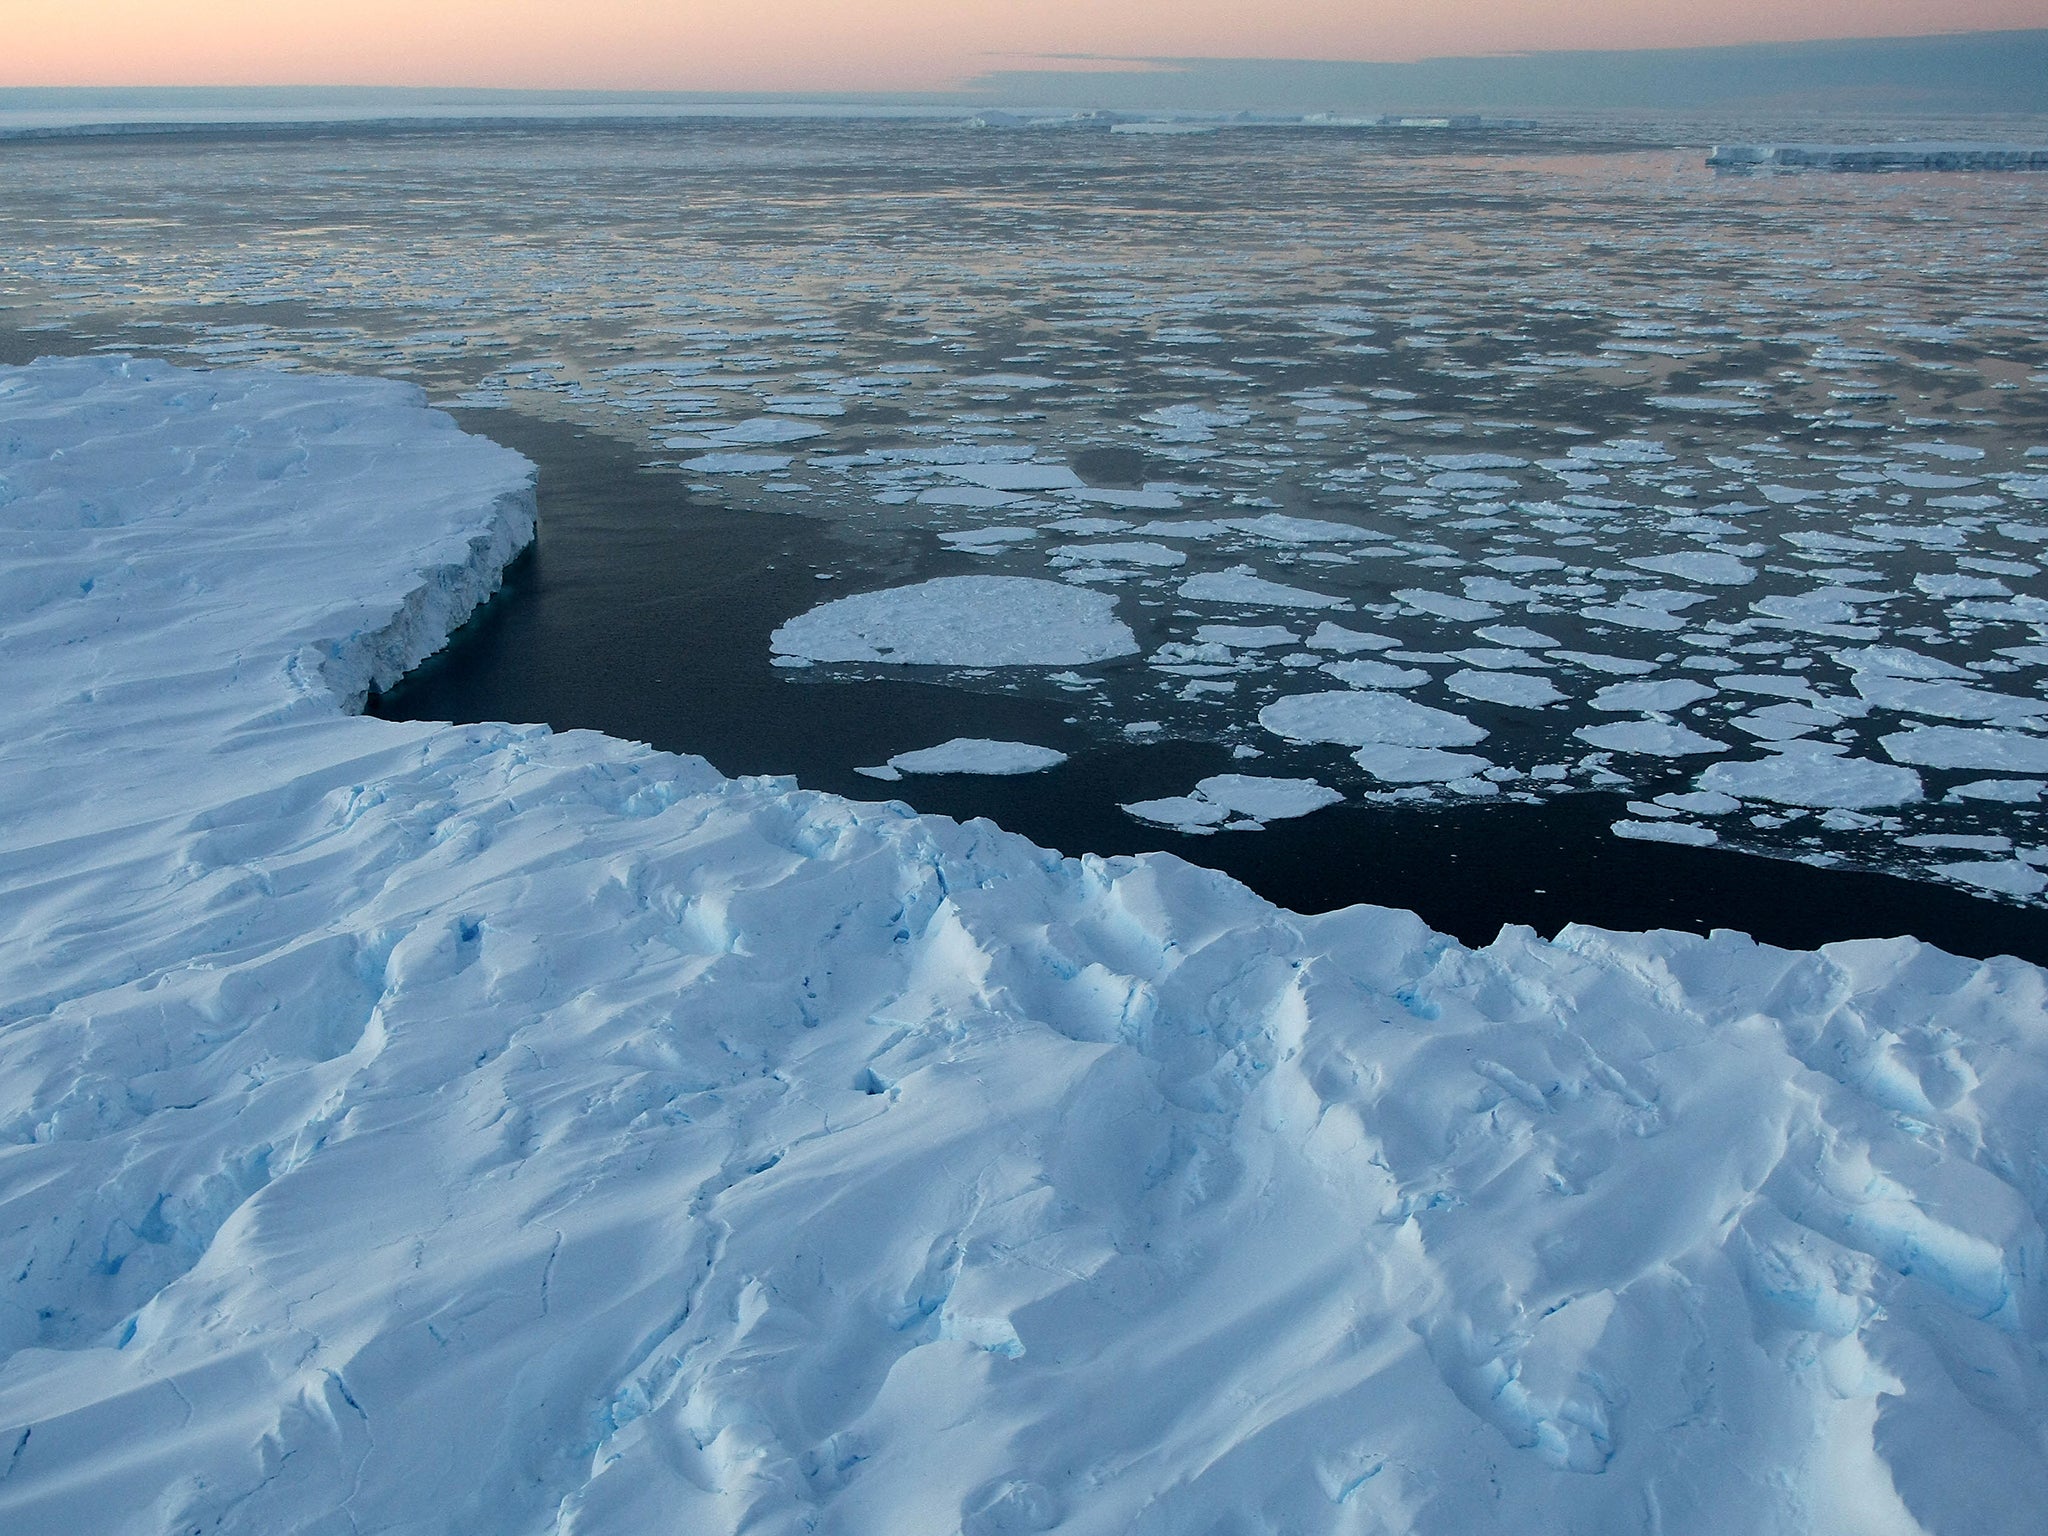 Scientists have longstanding concerns about the lost of ice in Antarctica